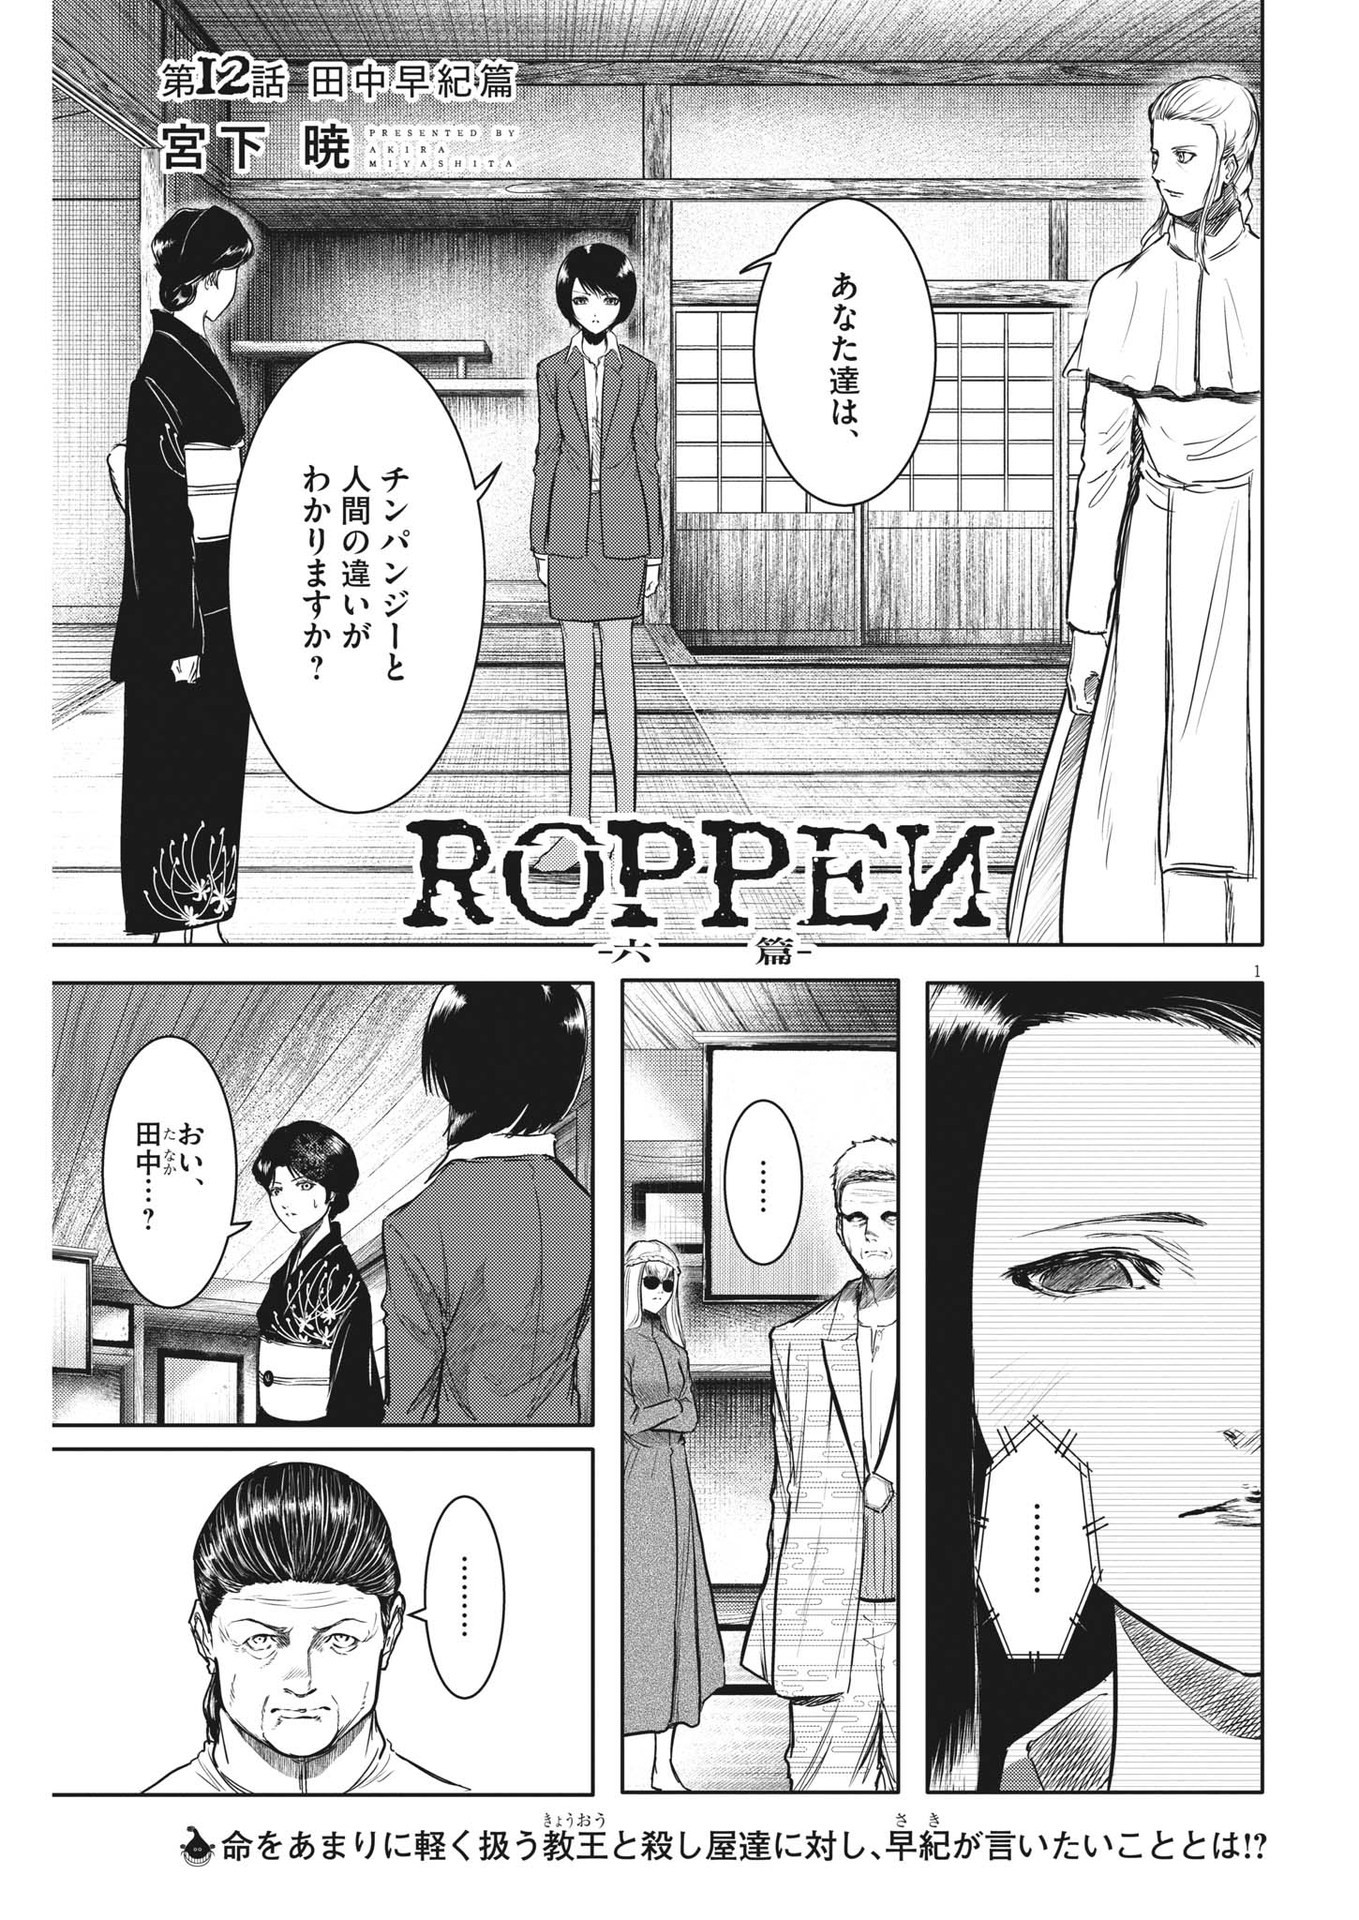 Roppen - Chapter 12 - Page 1